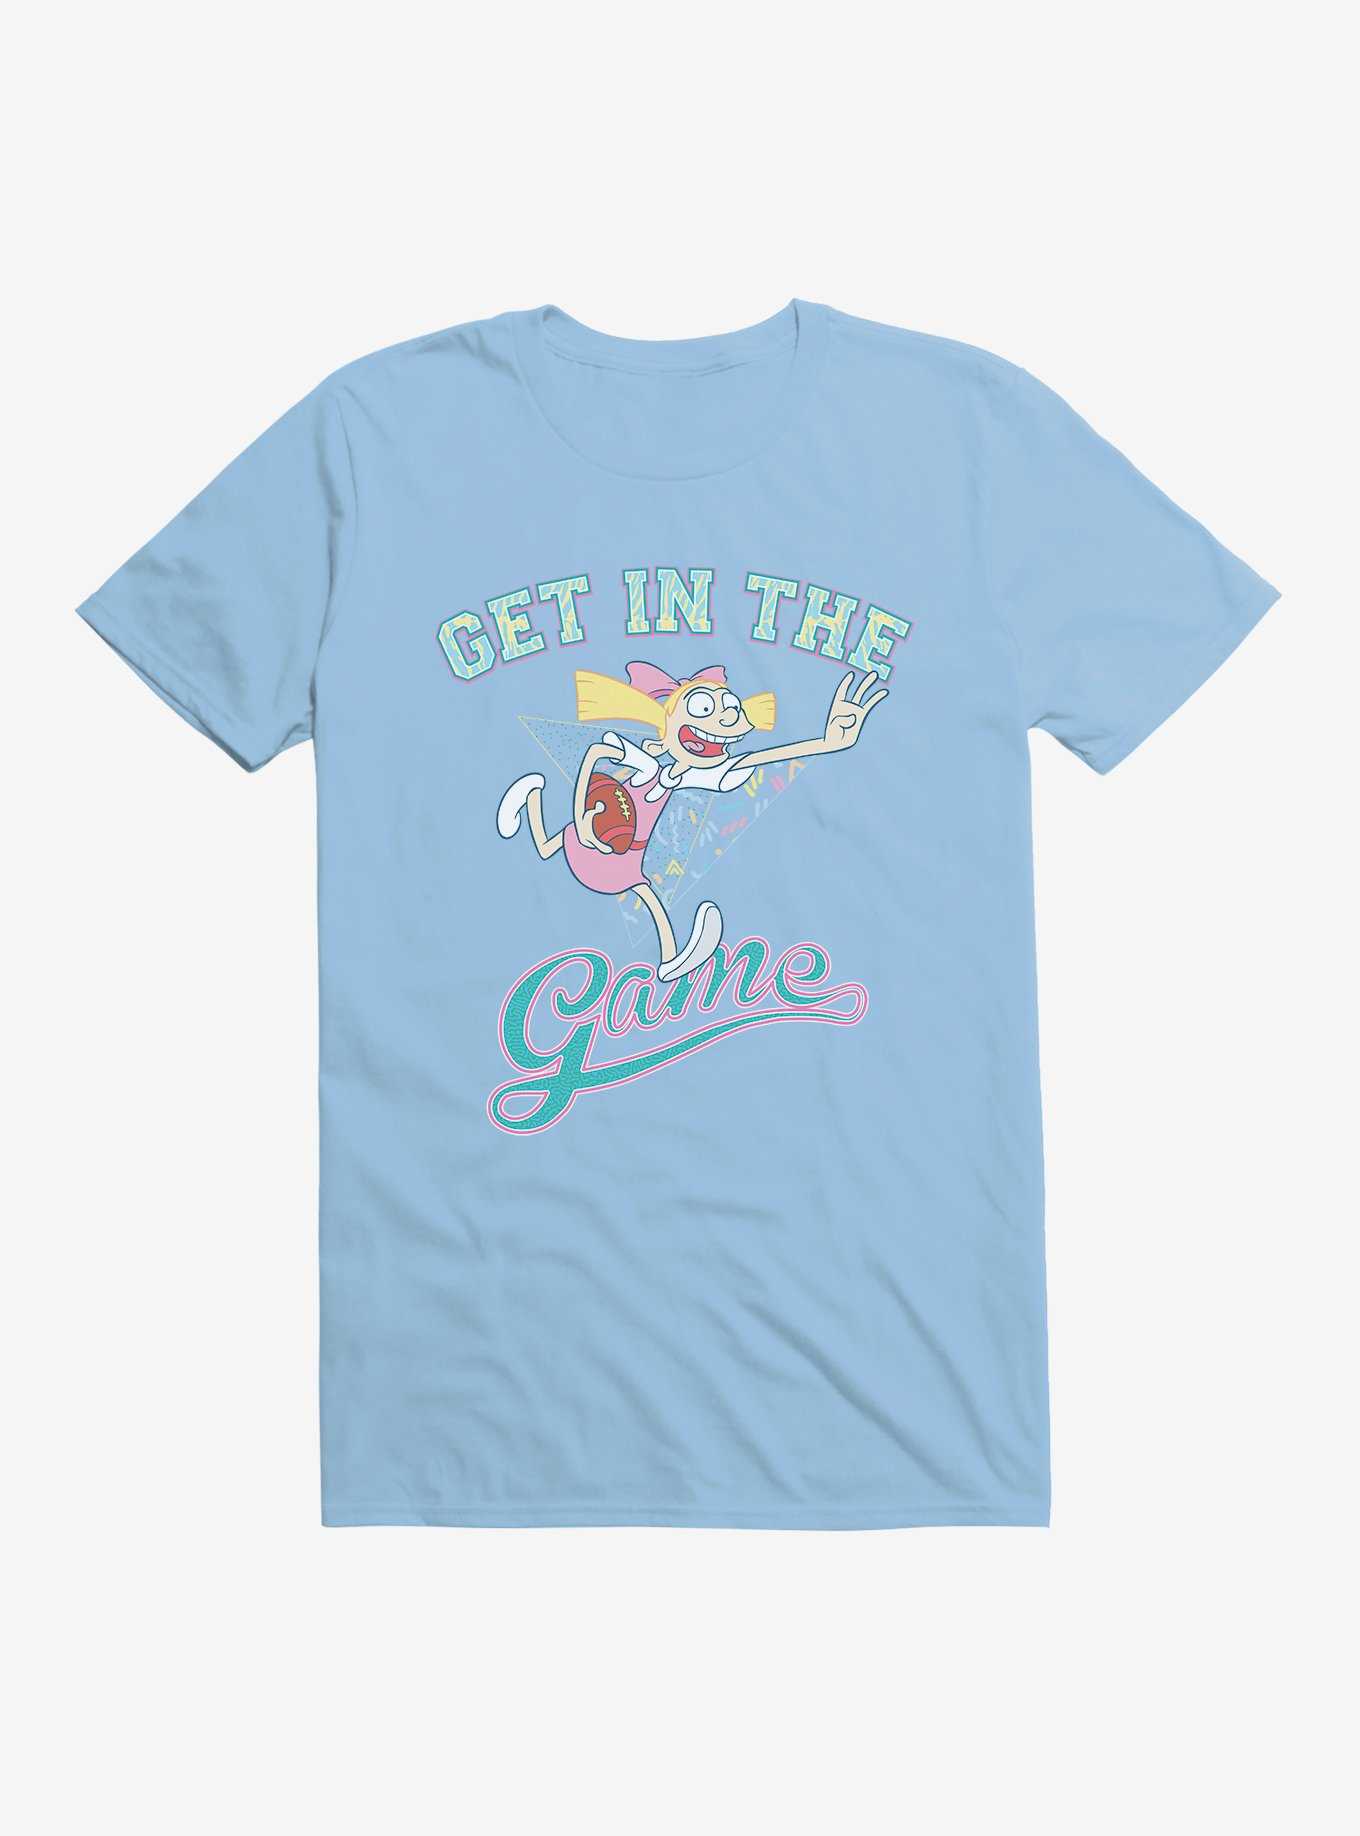 Hey Arnold! Get In The Game T-Shirt, , hi-res